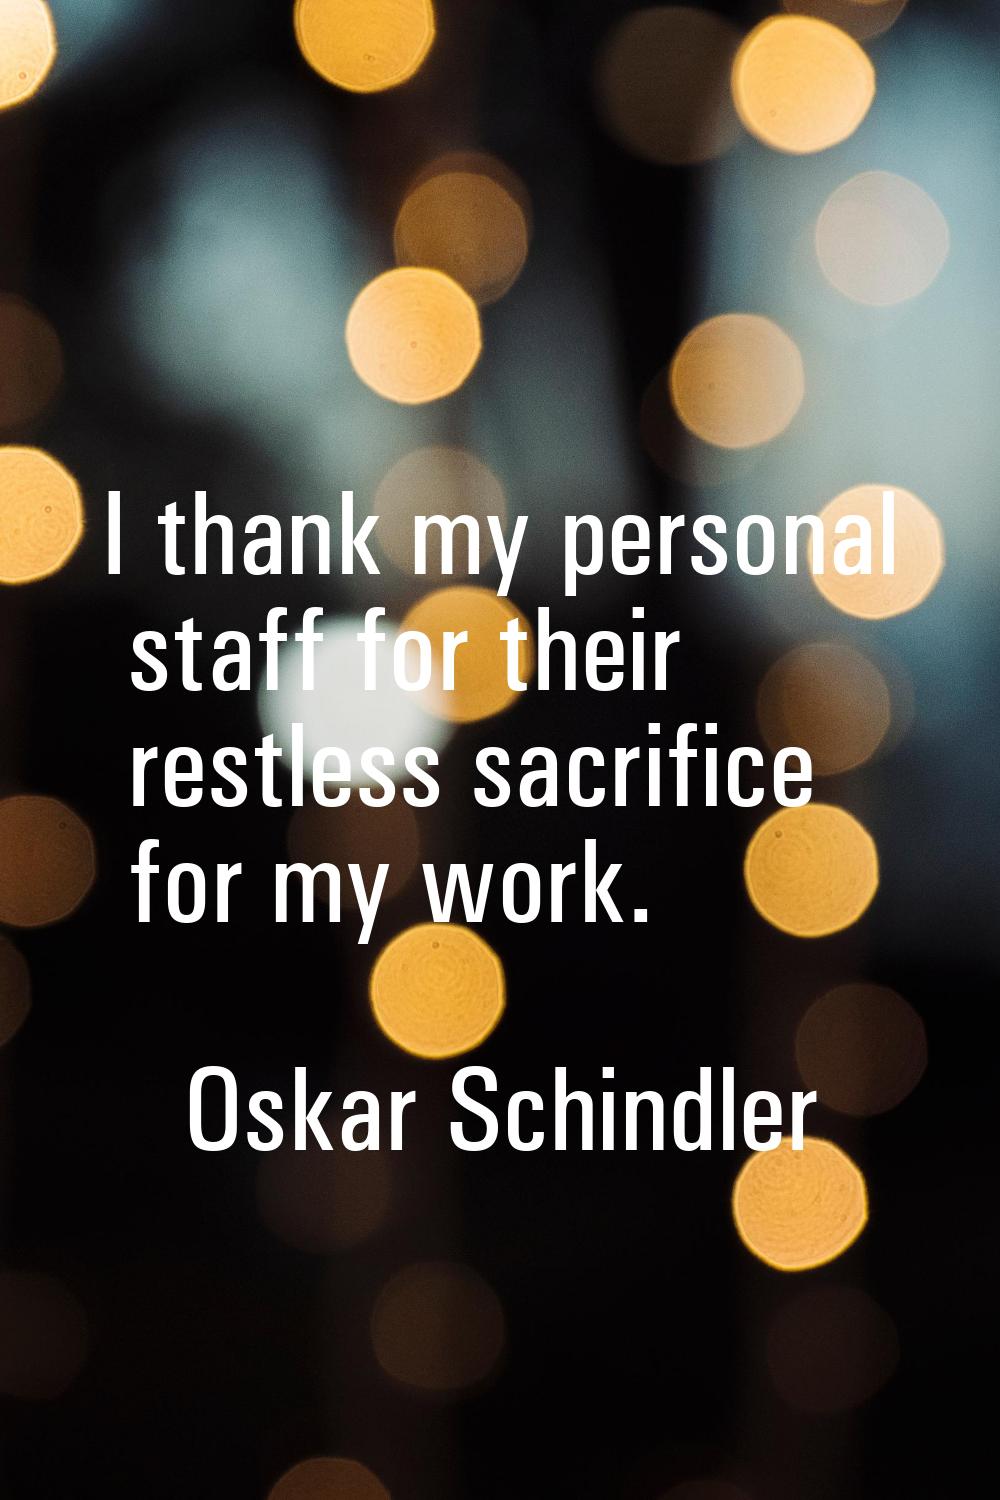 I thank my personal staff for their restless sacrifice for my work.